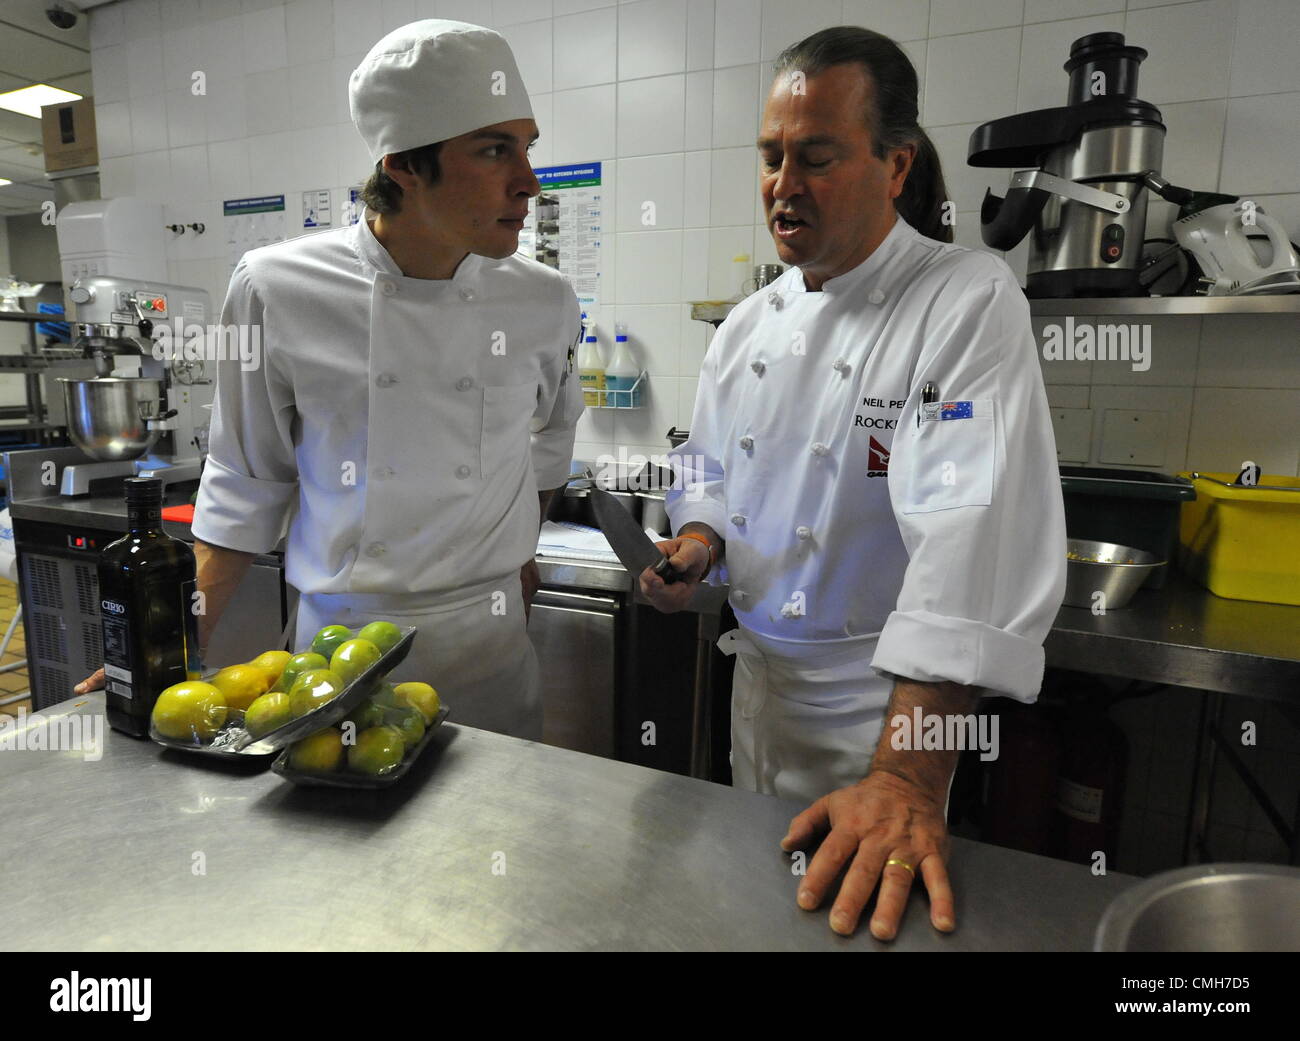 JOHANNESBURG, SOUTH AFRICA: Top Australian chef Neil Perry (R) on August 6, 2012 in the kitchen of the Level Four Restaurant of the 54 on Bath hotel in Johannesburg, South Africa. Perry got a better understanding of South African cooking styles during a cooking demonstration filmed for Australian television. (Photo by Gallo Images / Duif du Toit) Stock Photo